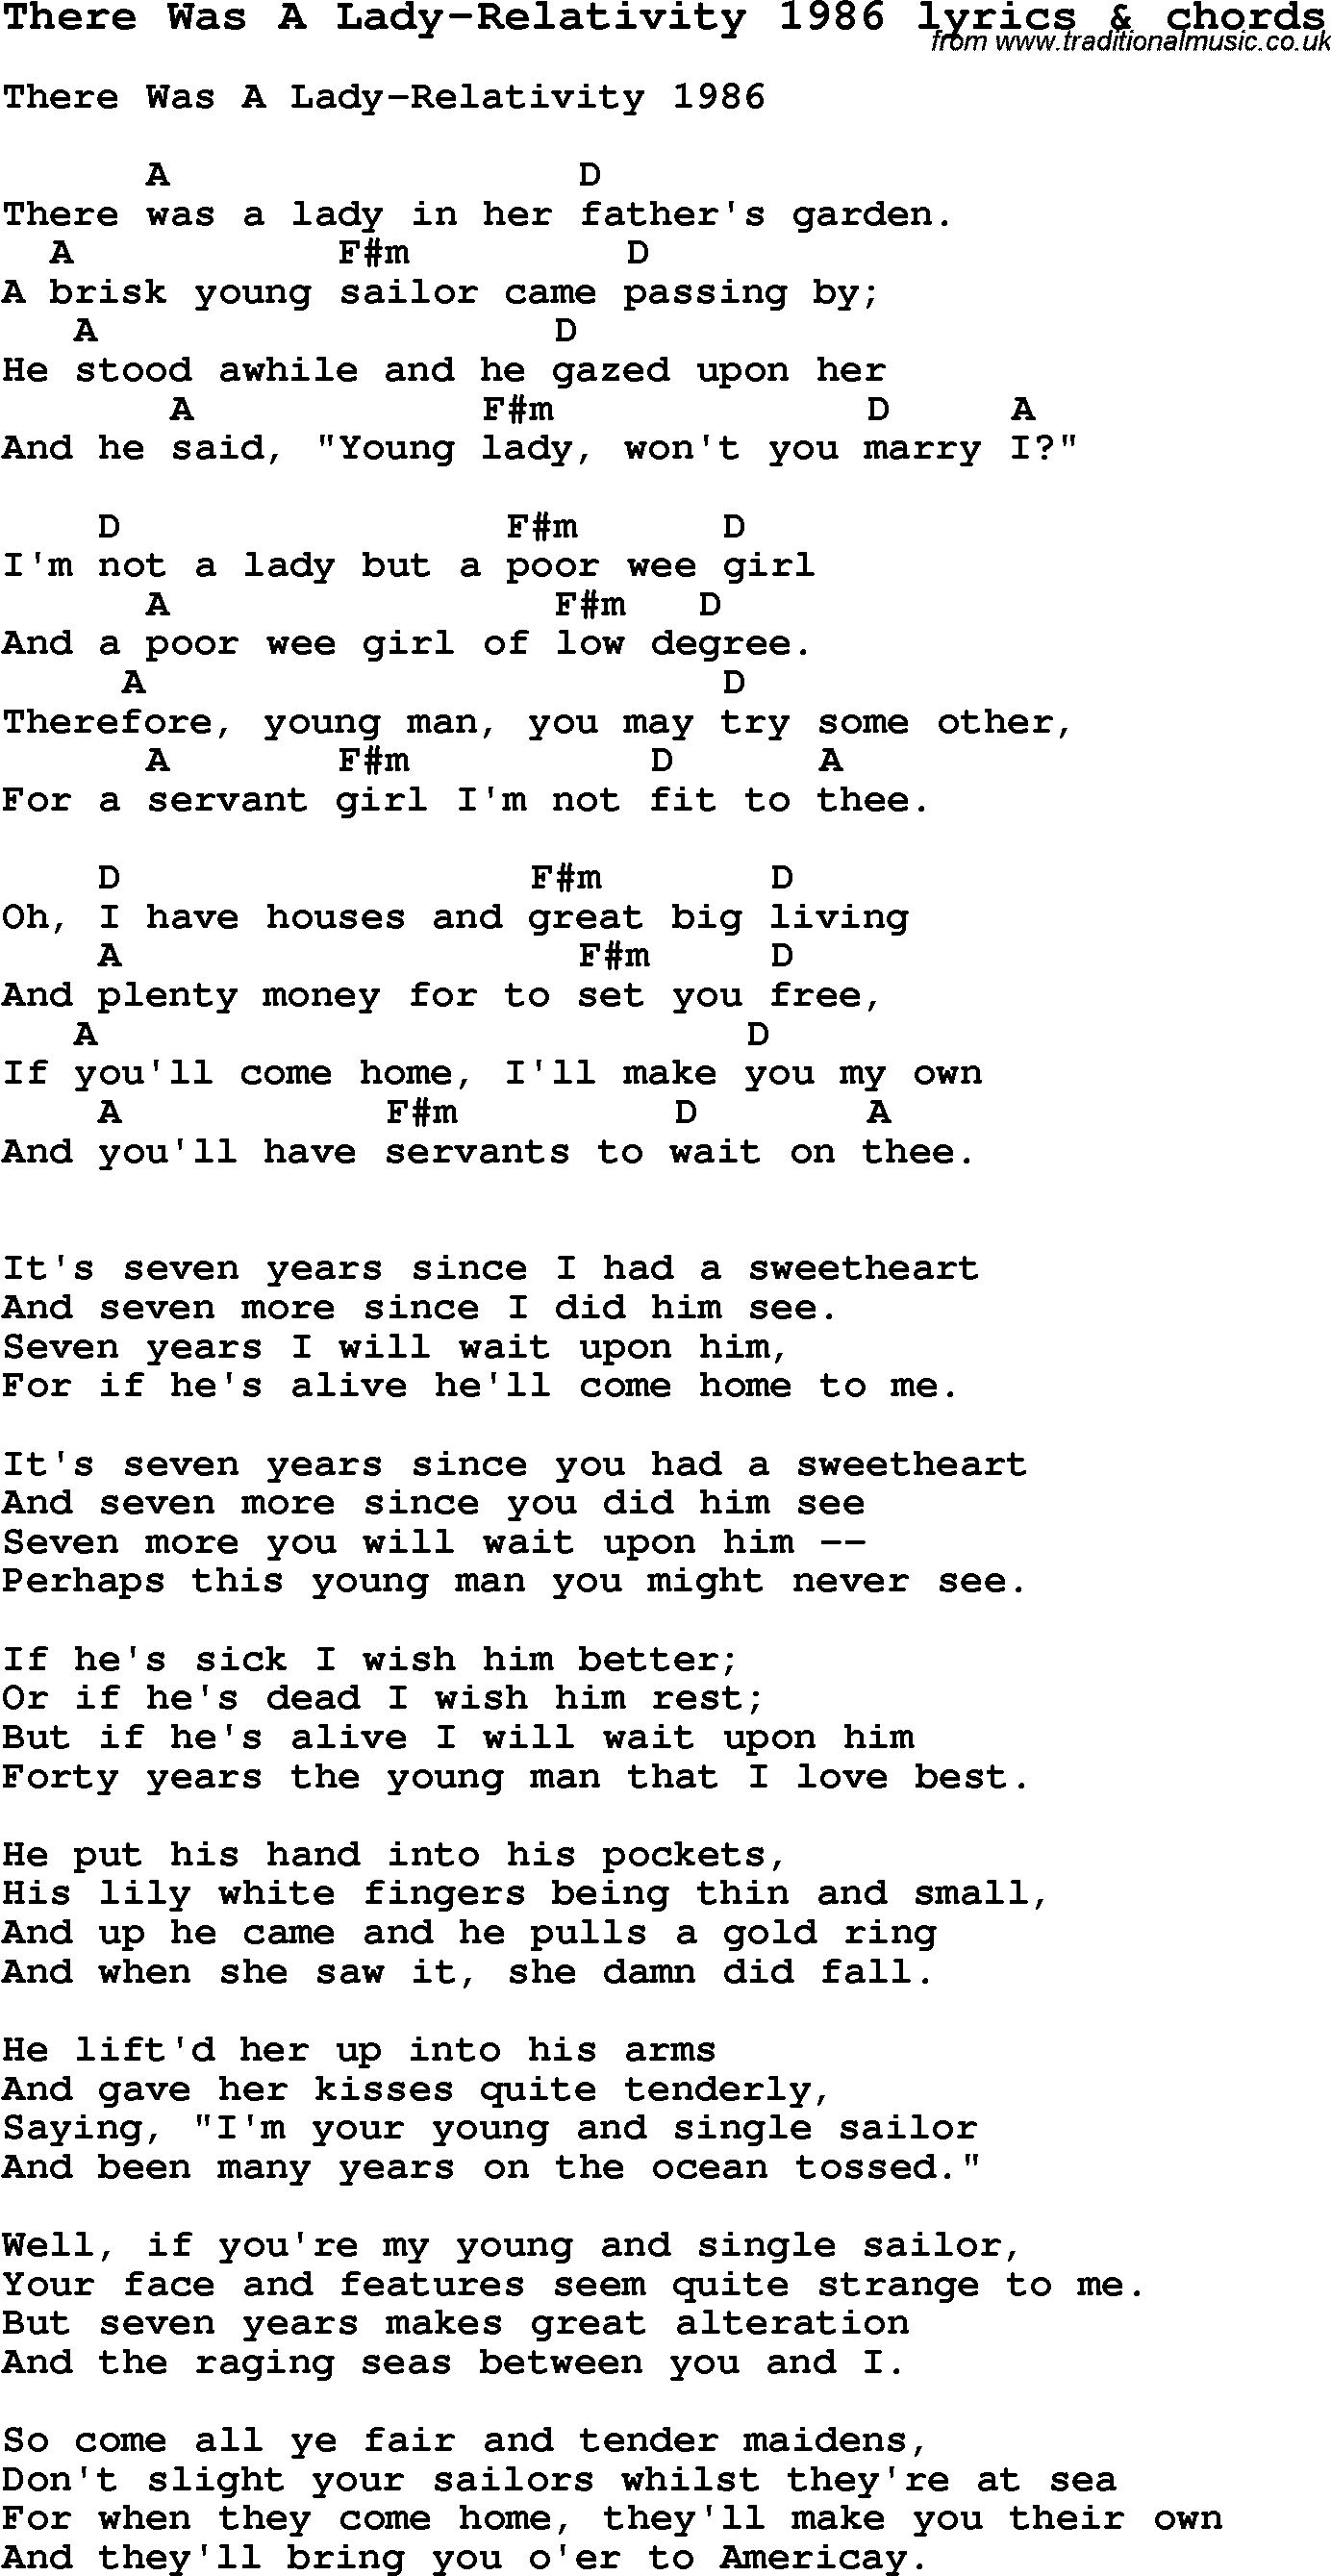 Love Song Lyrics for: There Was A Lady-Relativity 1986 with chords for Ukulele, Guitar Banjo etc.